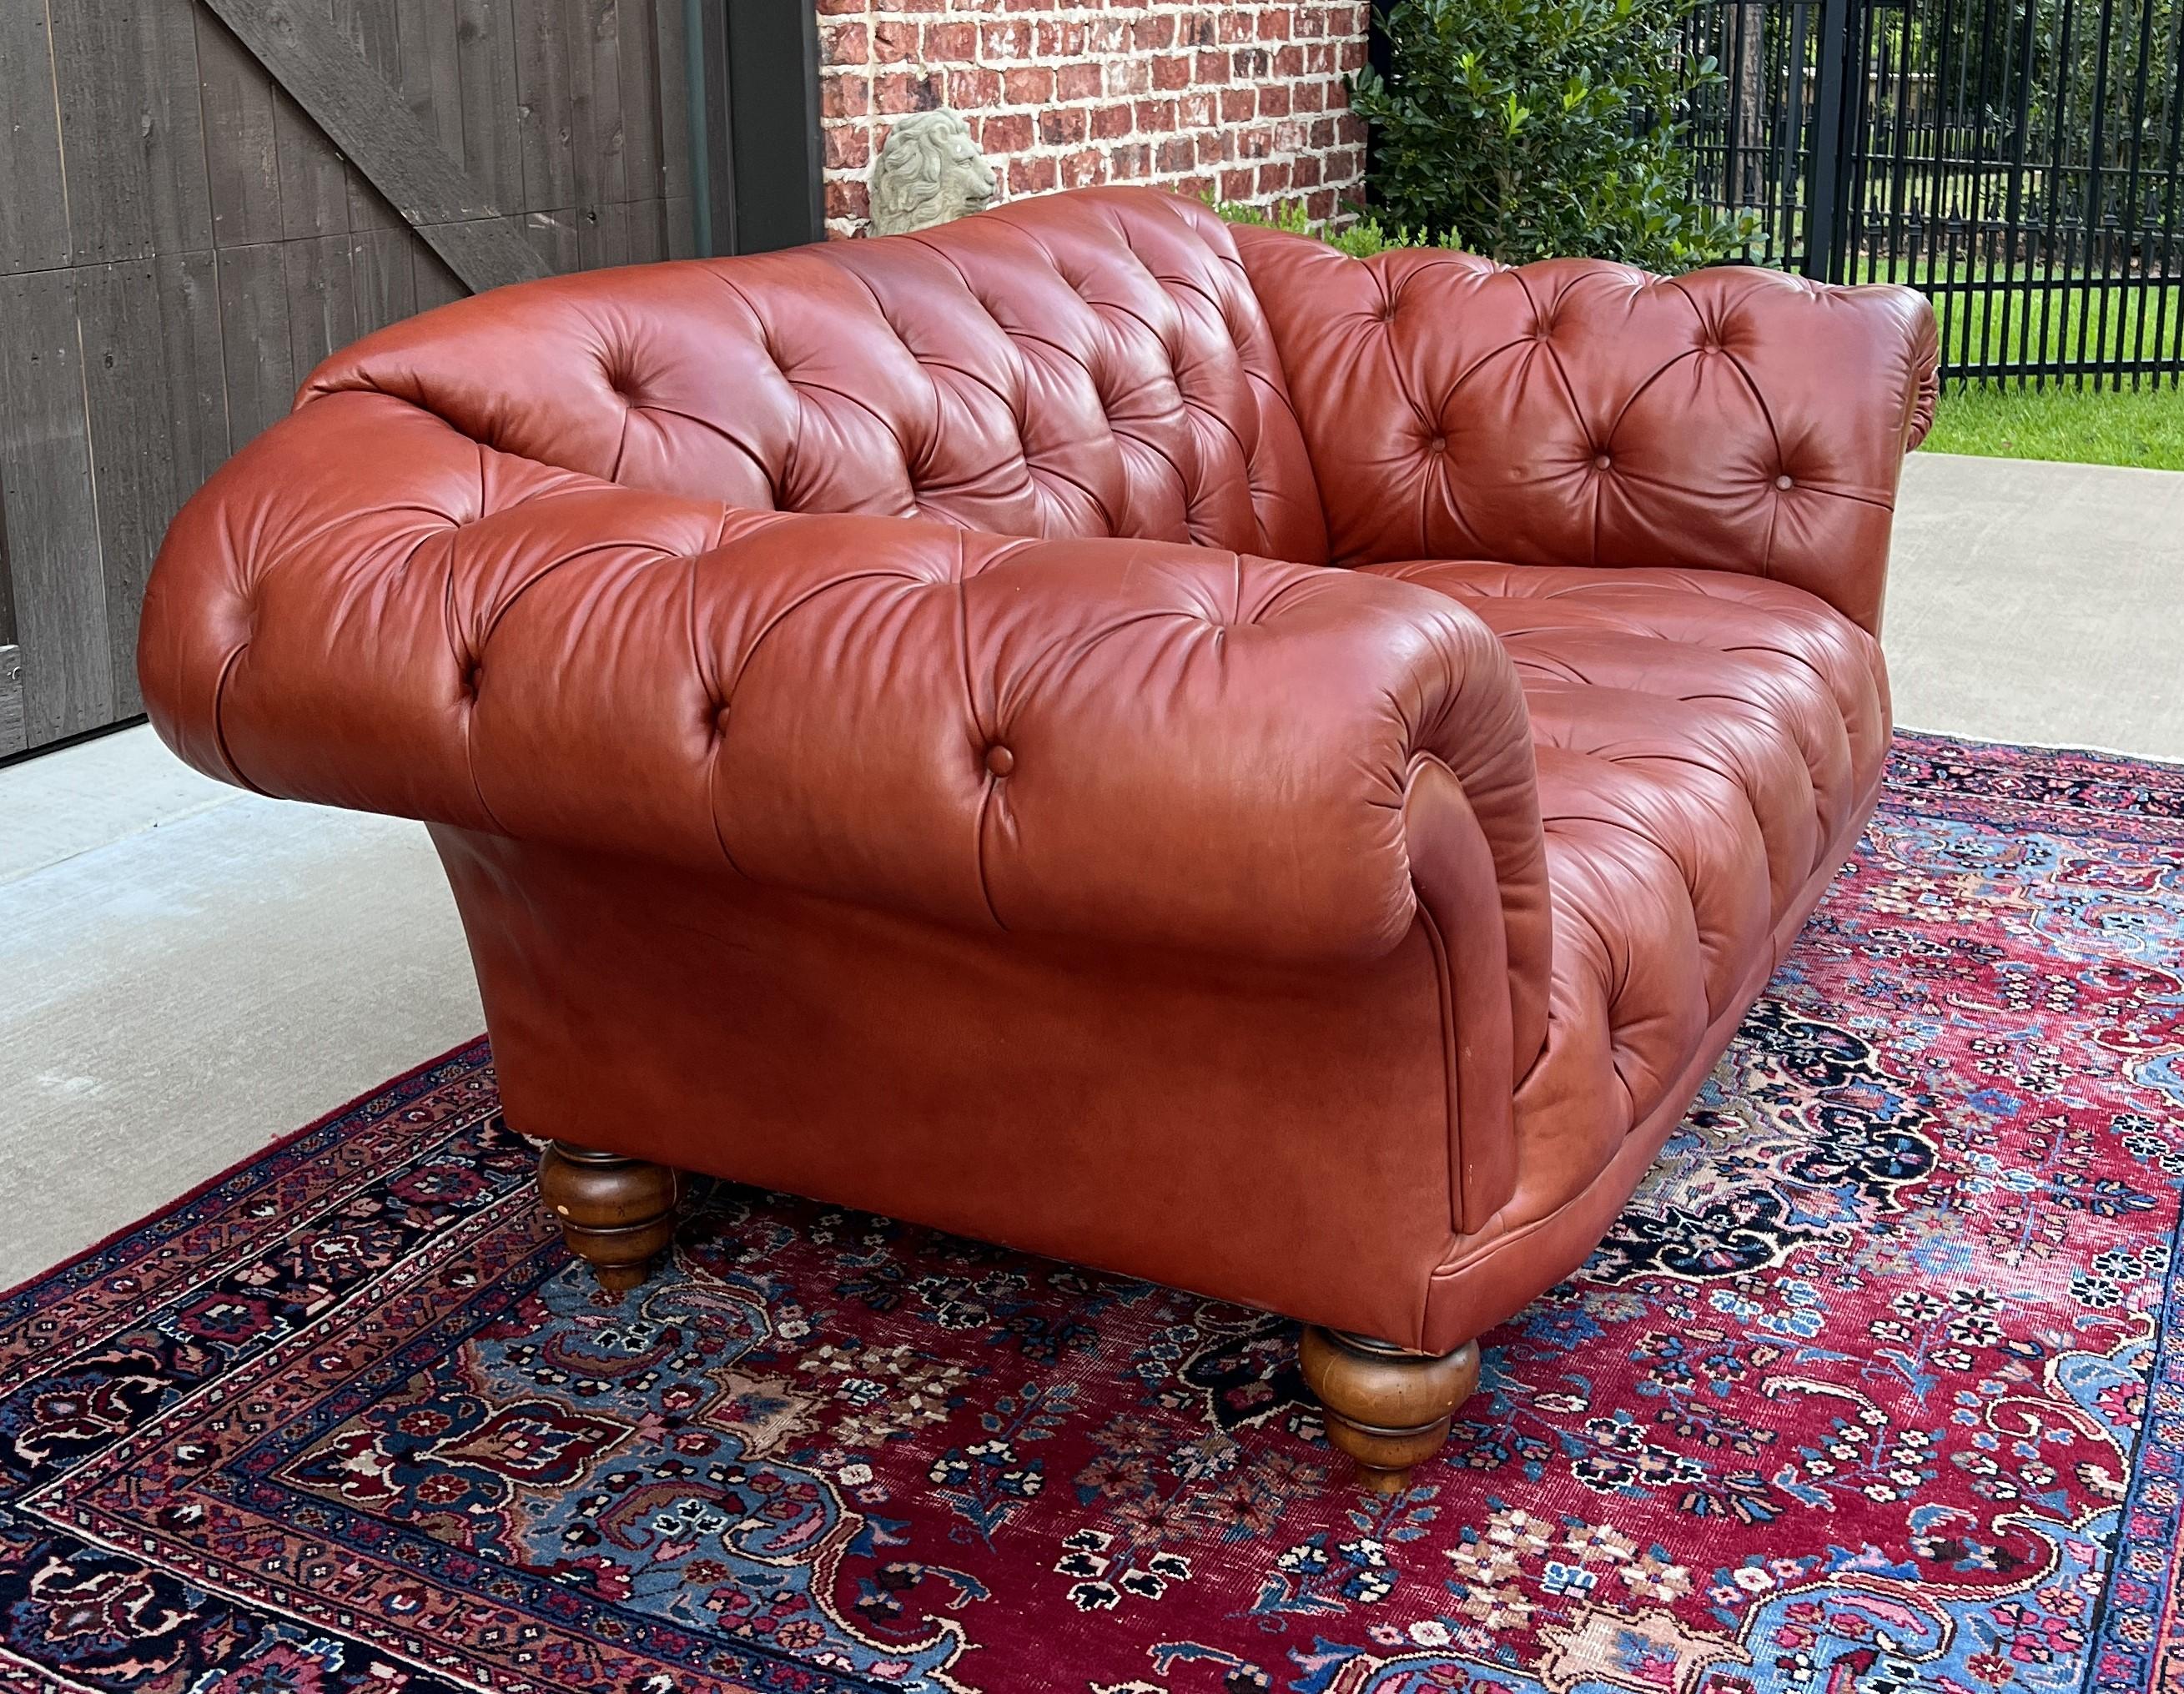 TIMELESS Vintage Mid-Century English Leather Tufted Seat CHESTERFIELD 3-Seat Sofa Brown/Terra Cotta

PERFECT ICONIC look for a gentleman's office, study, library, or cigar lounge~~fully button tufted 